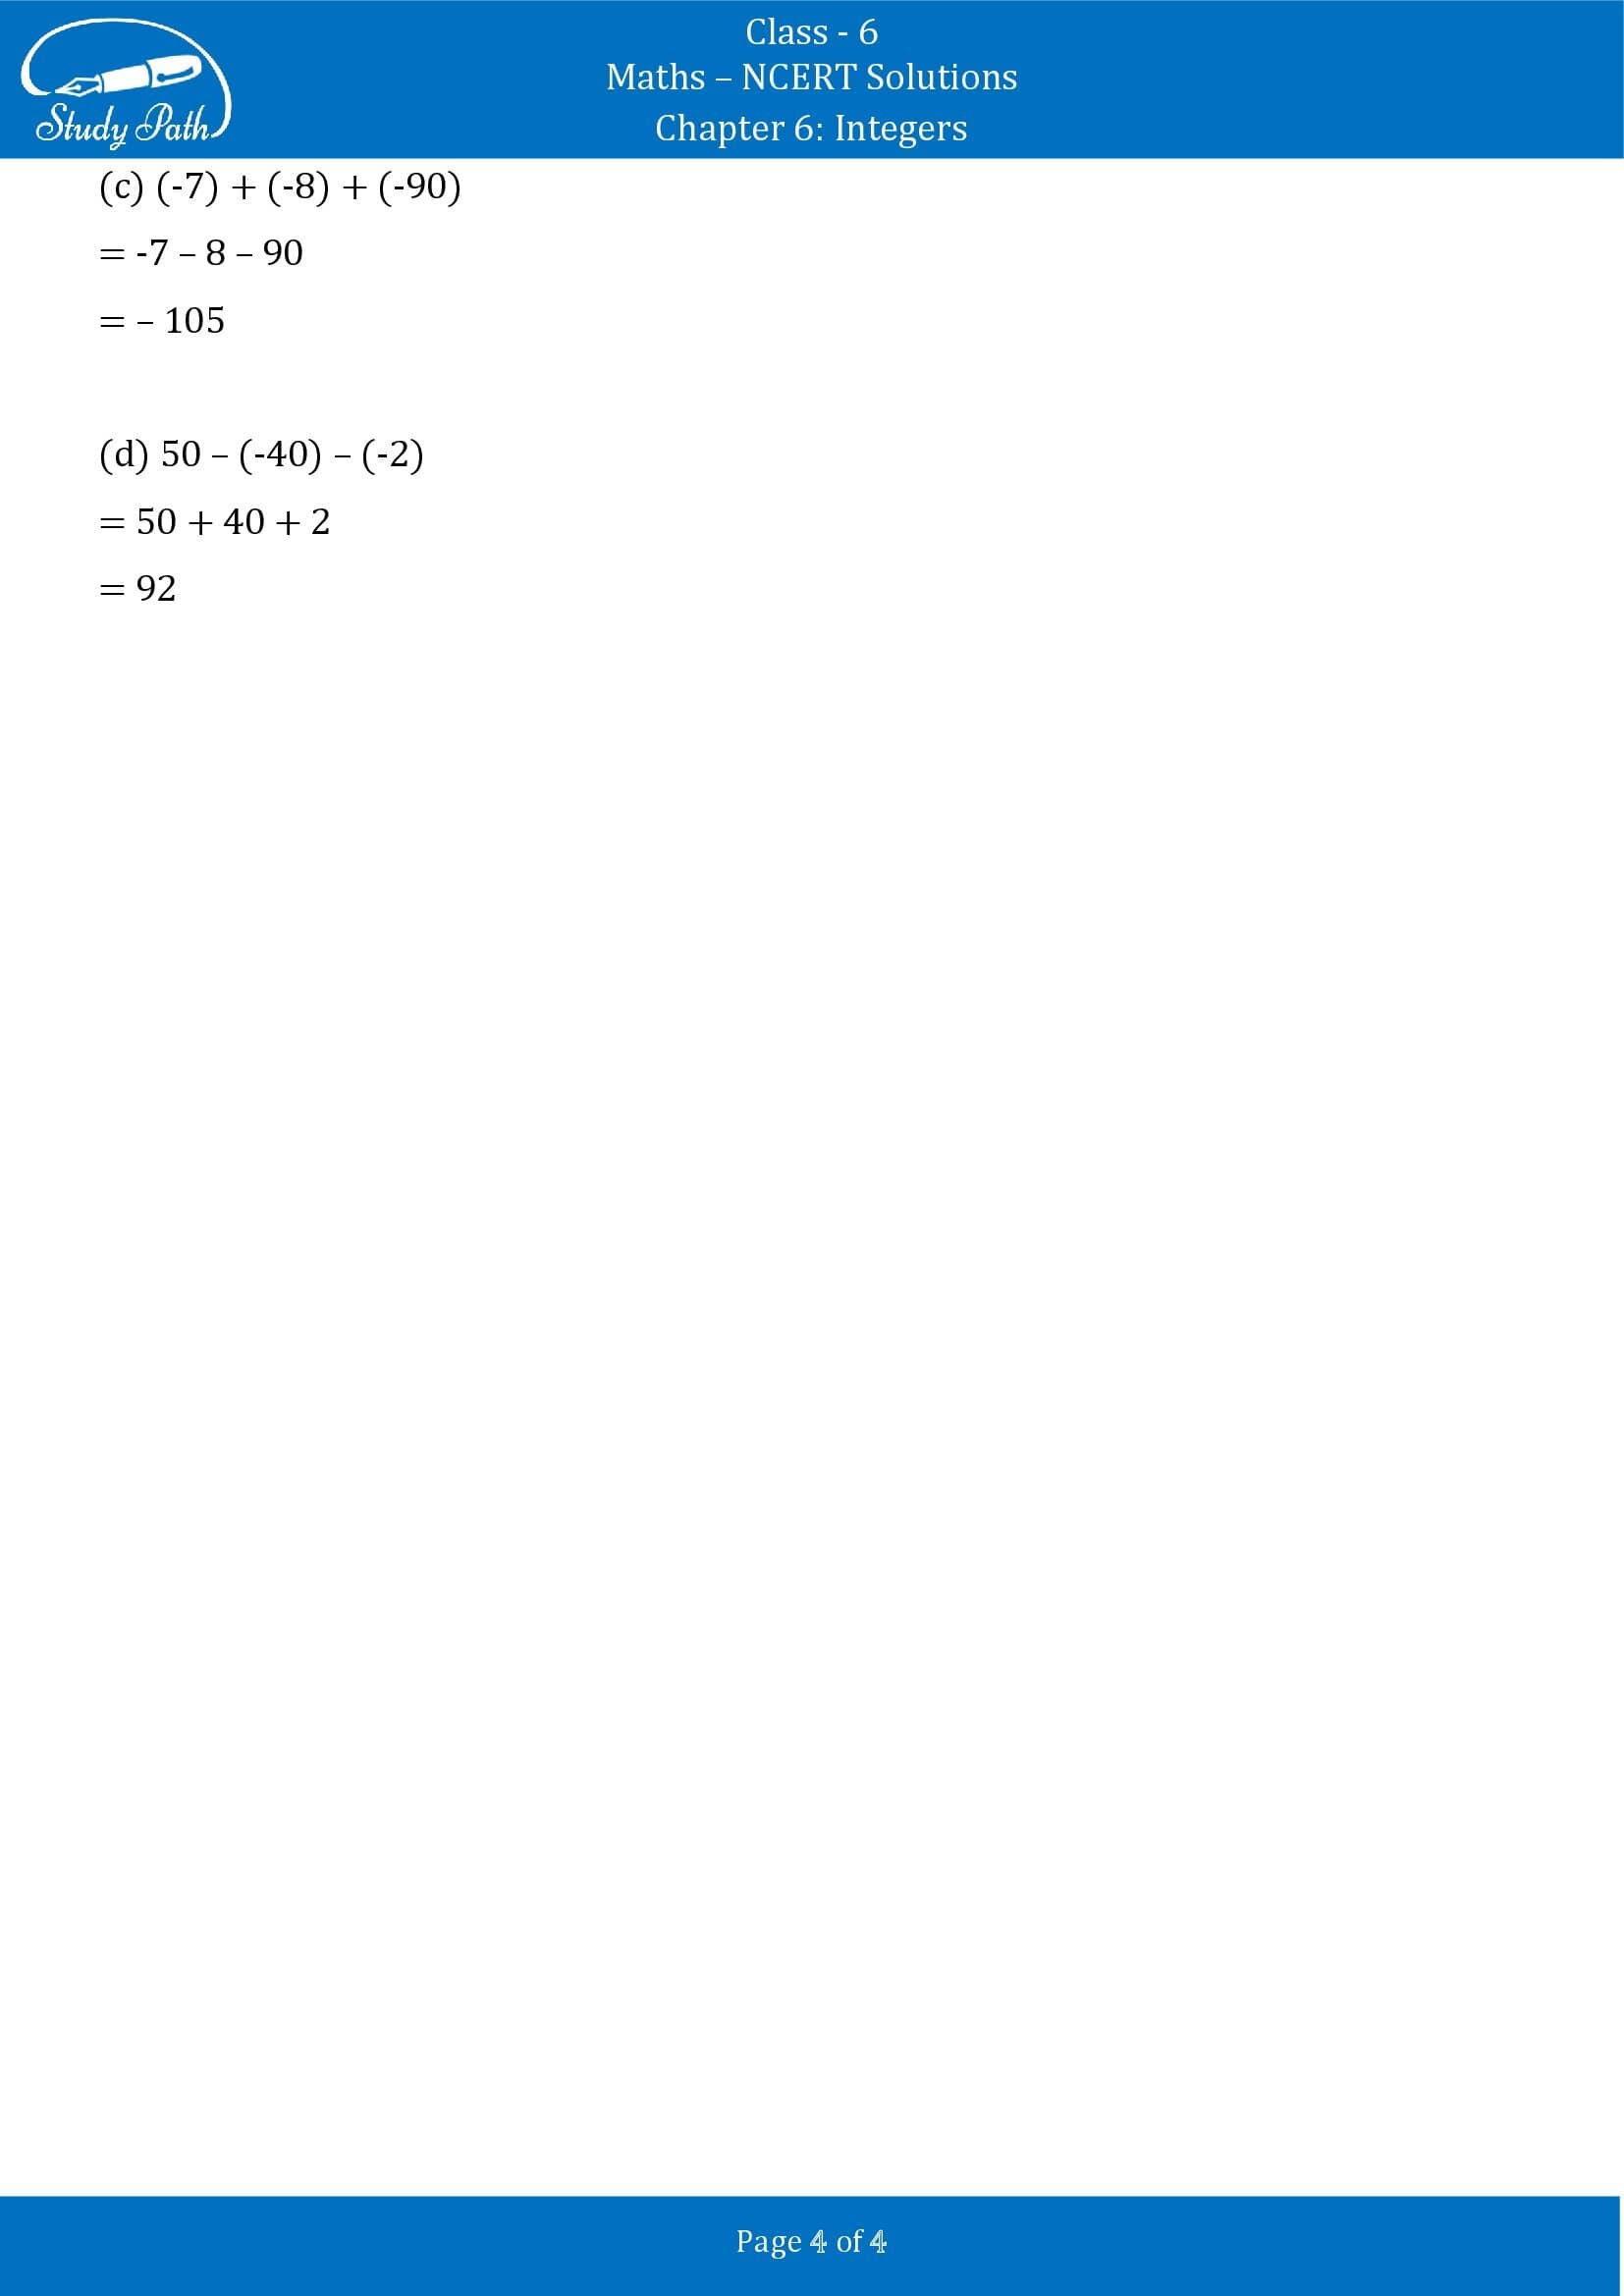 NCERT Solutions for Class 6 Maths Chapter 6 Integers Exercise 6.3 00004